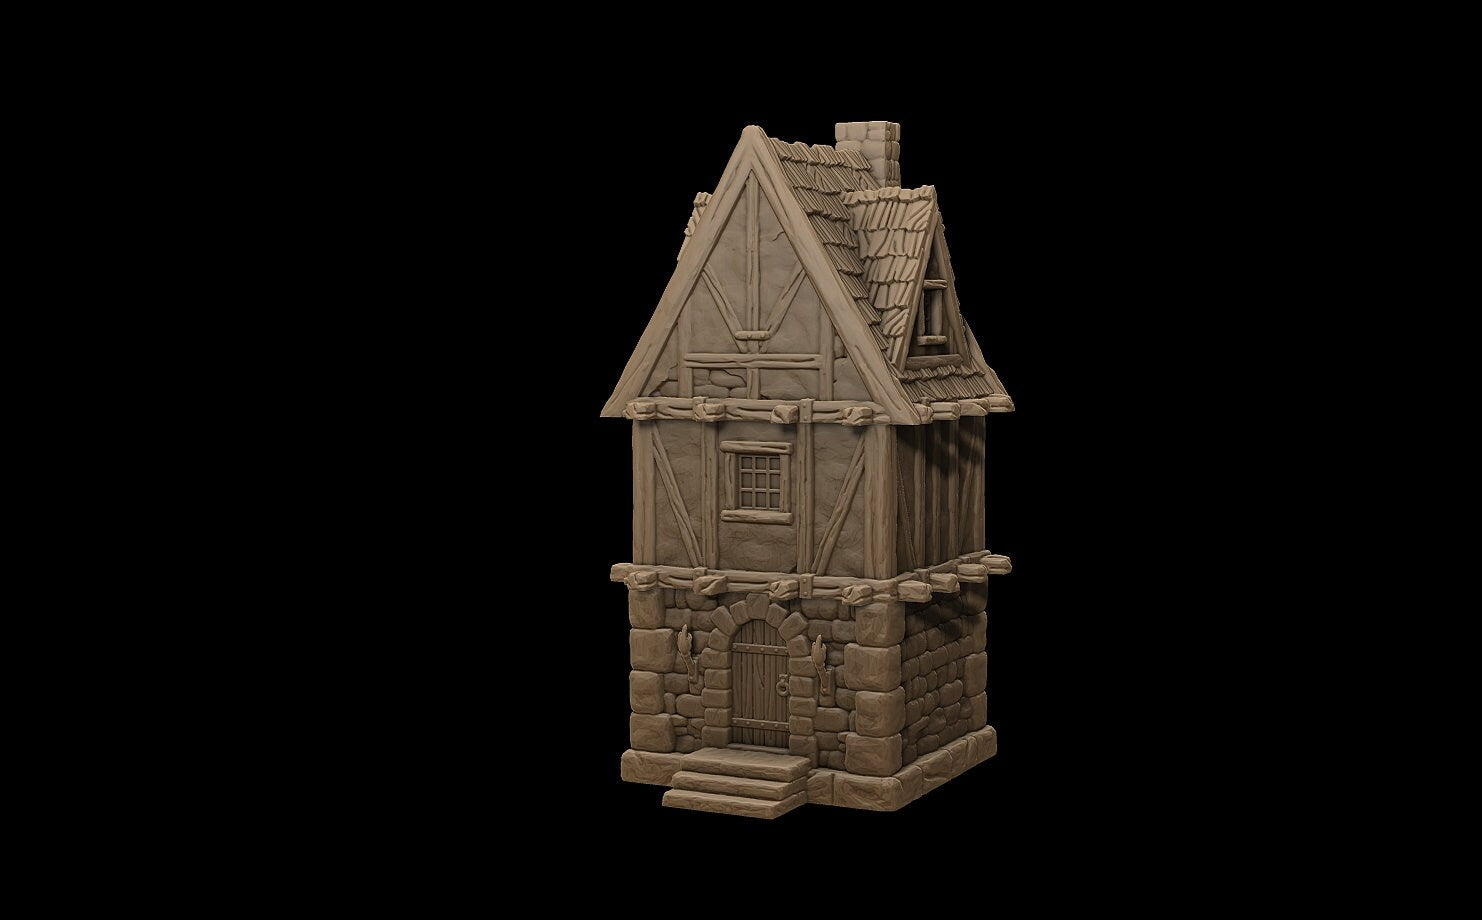 Tower, Tower House, Stormhill, city set, town set, House, Terrain, Tabletop, Tabletop Terrain, Tabletop Gaming, Dungeons and Dragons, Wargaming, DnD, D&D, city, tabletop games